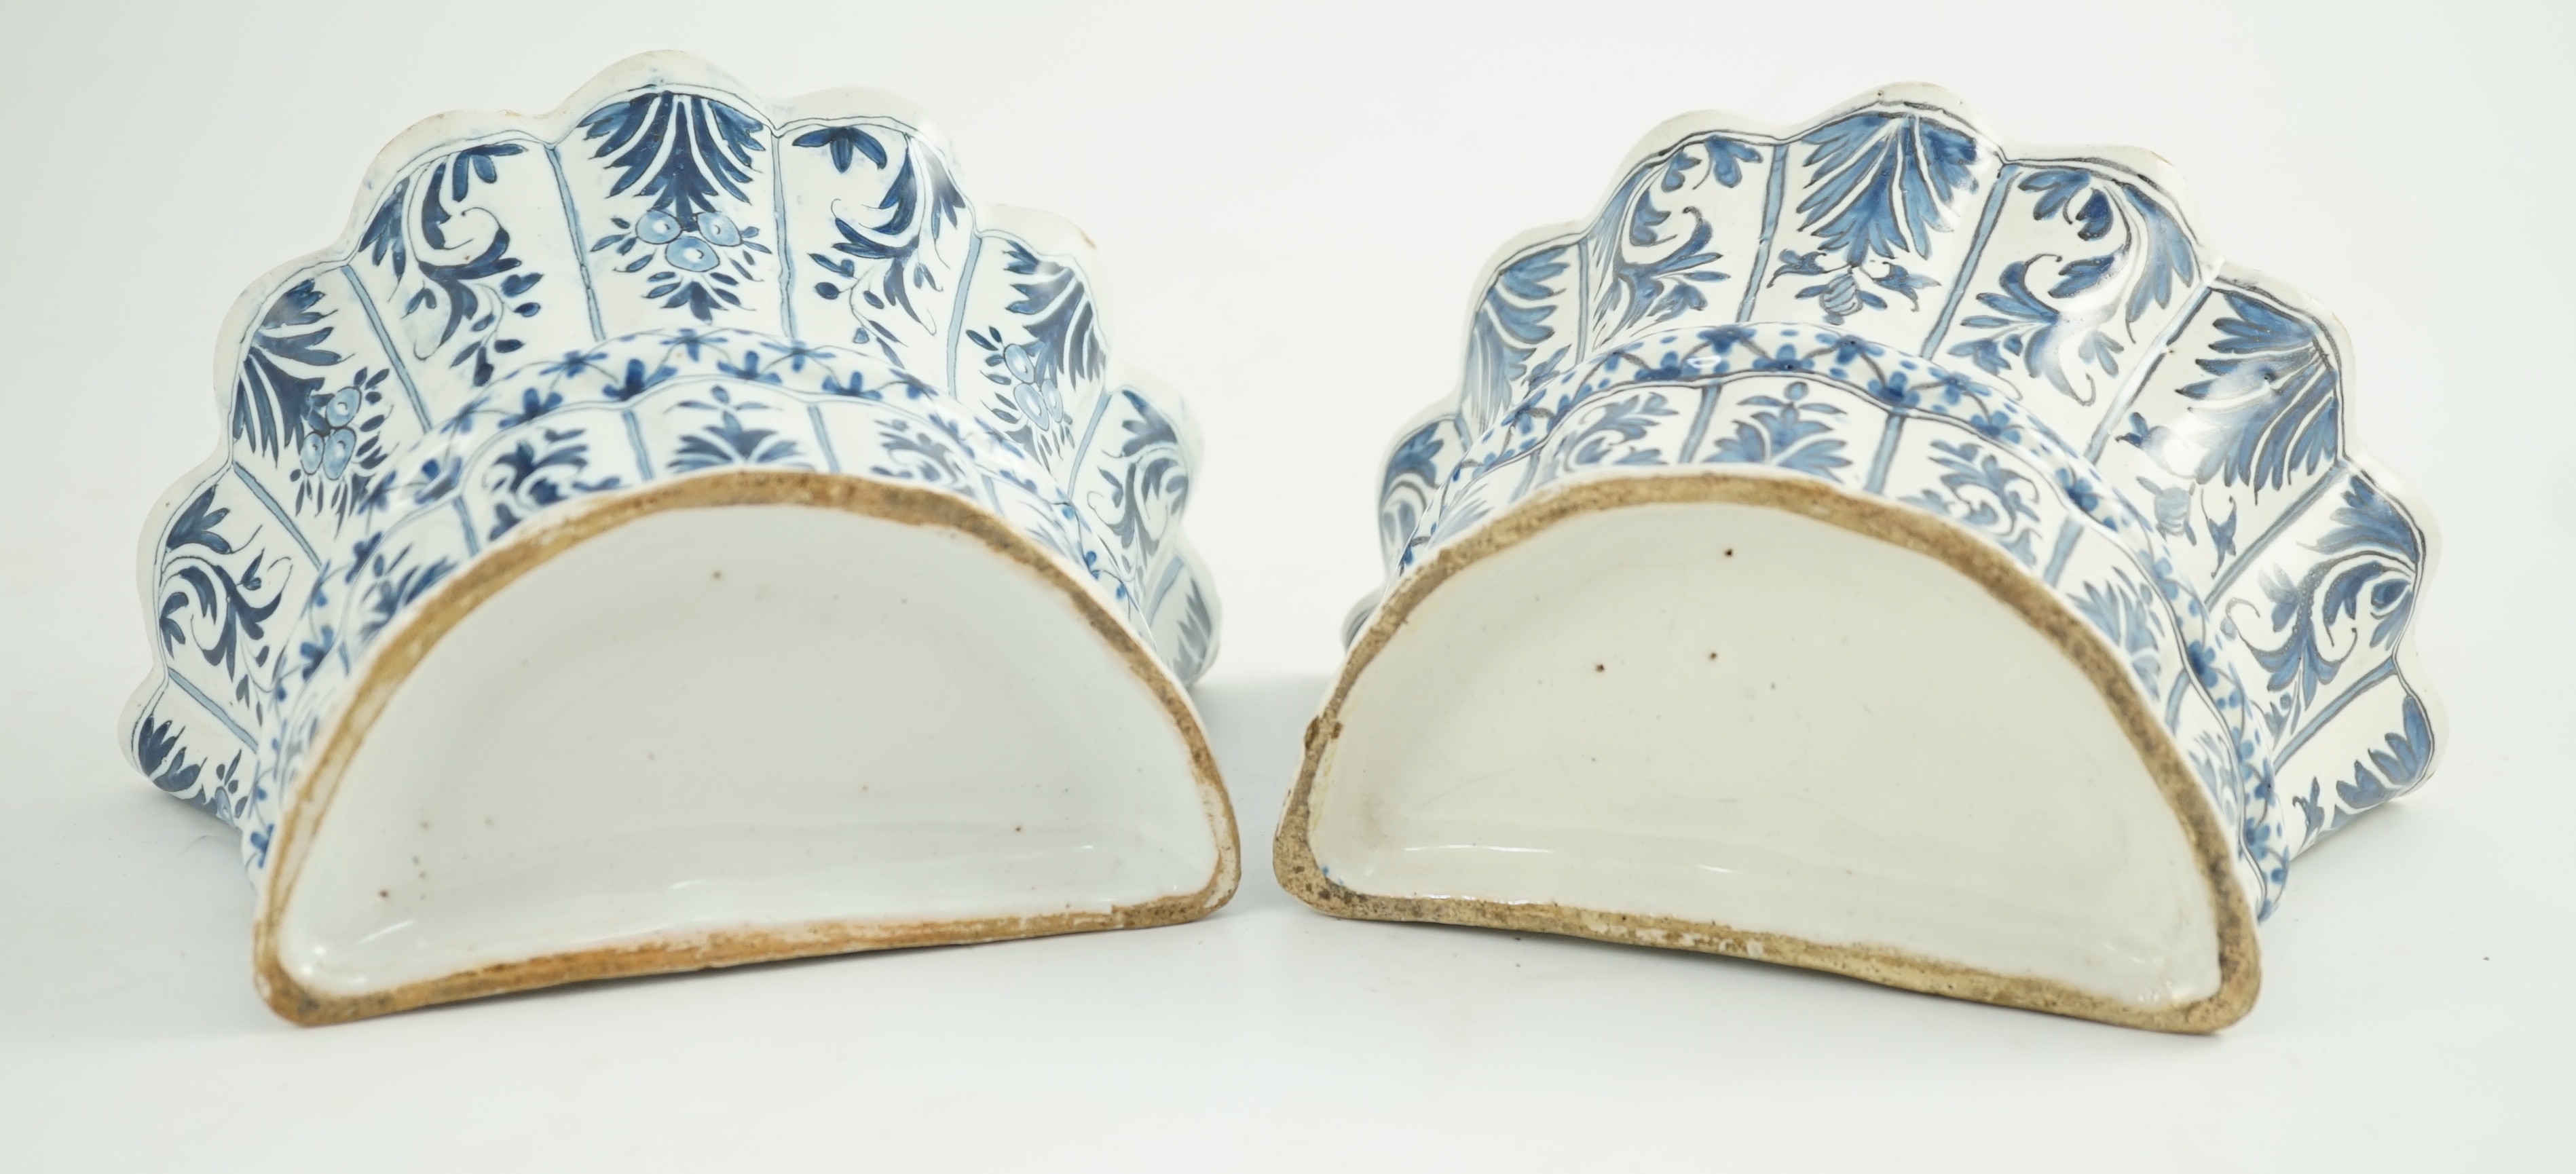 Two similar 18th century Delft blue and white hanging bough pots, 18.3cm wide